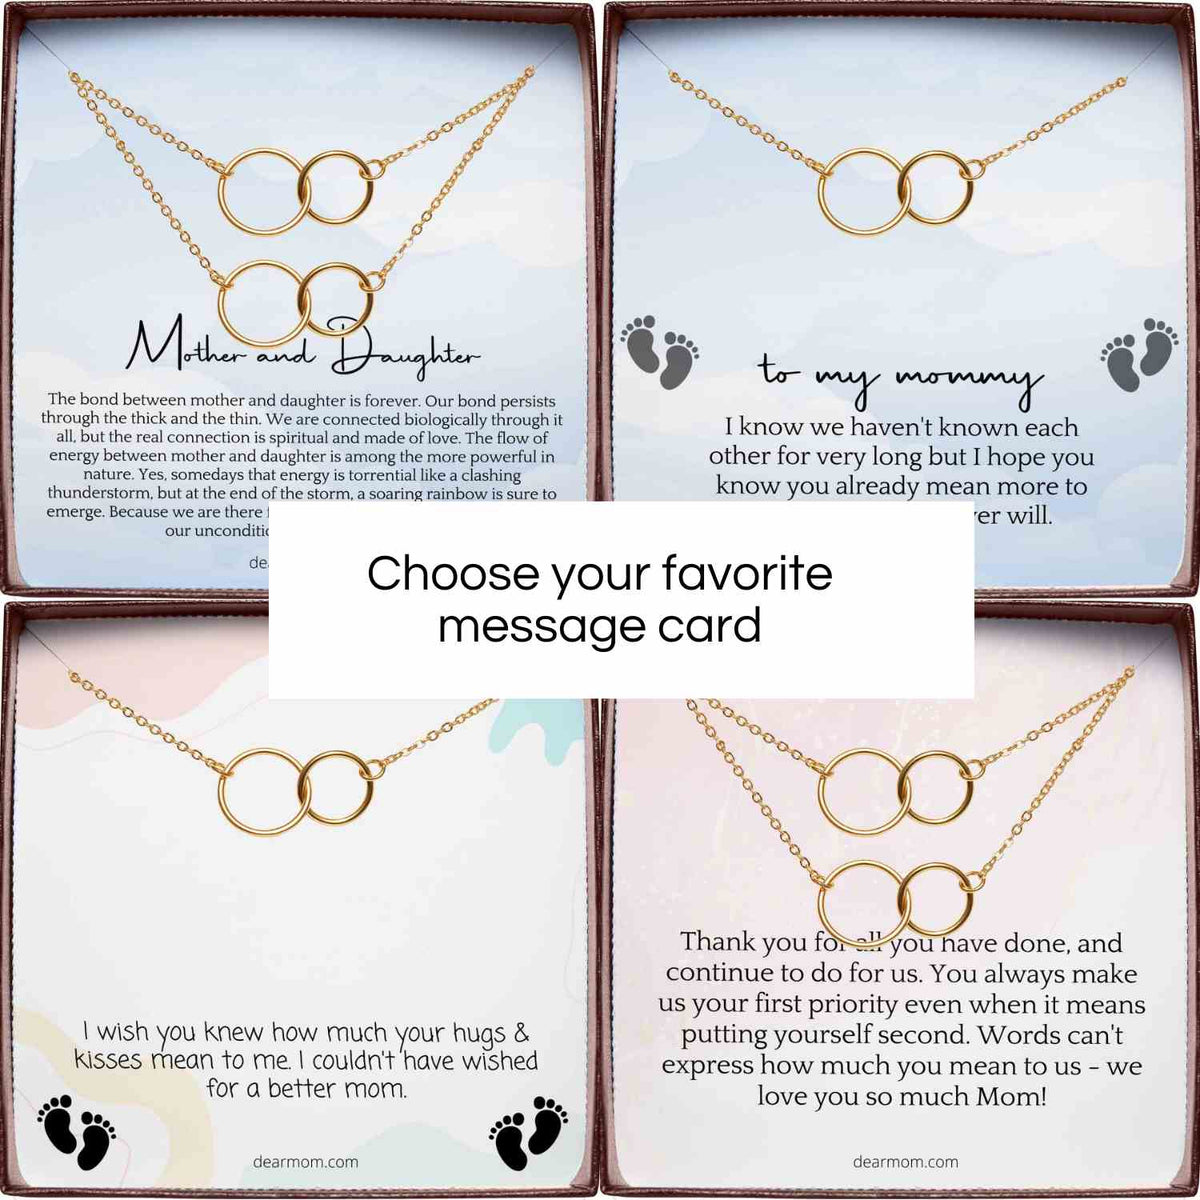 Interlocking Circle Necklace | Gift for Mom